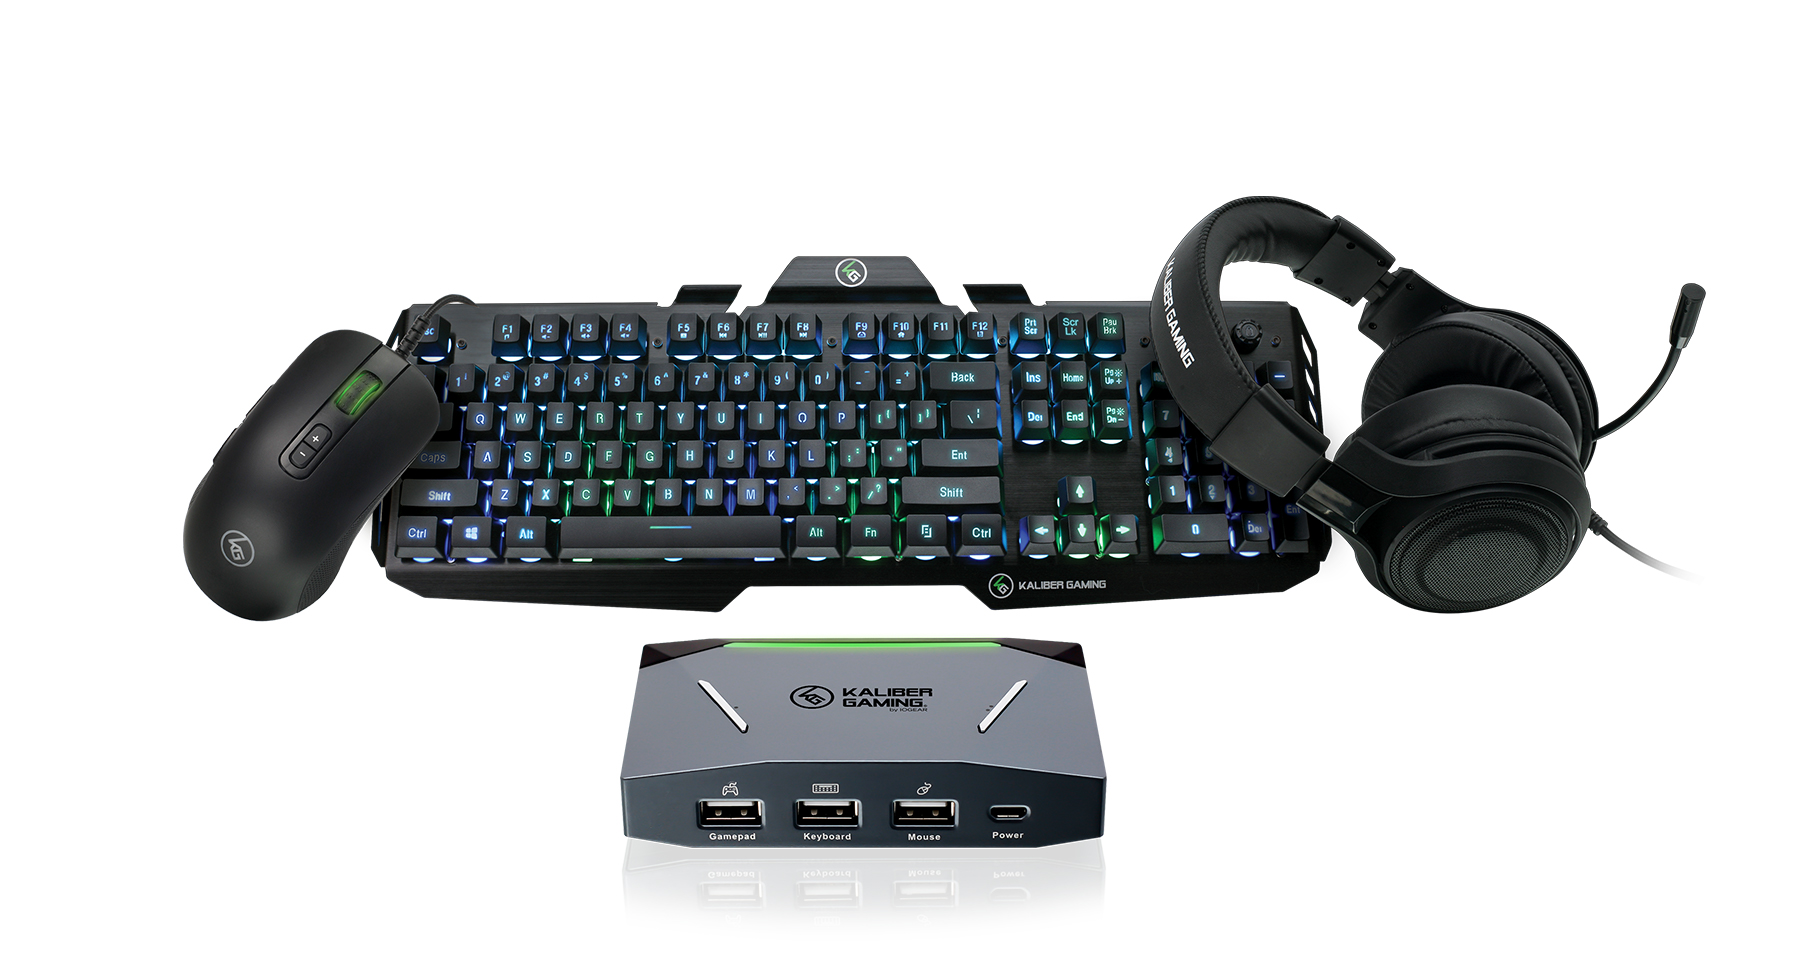 IOGEAR KeyMander 2 lets mobile gamers use keyboard and mouse with iPhones,  iPads, or Apple TV devices